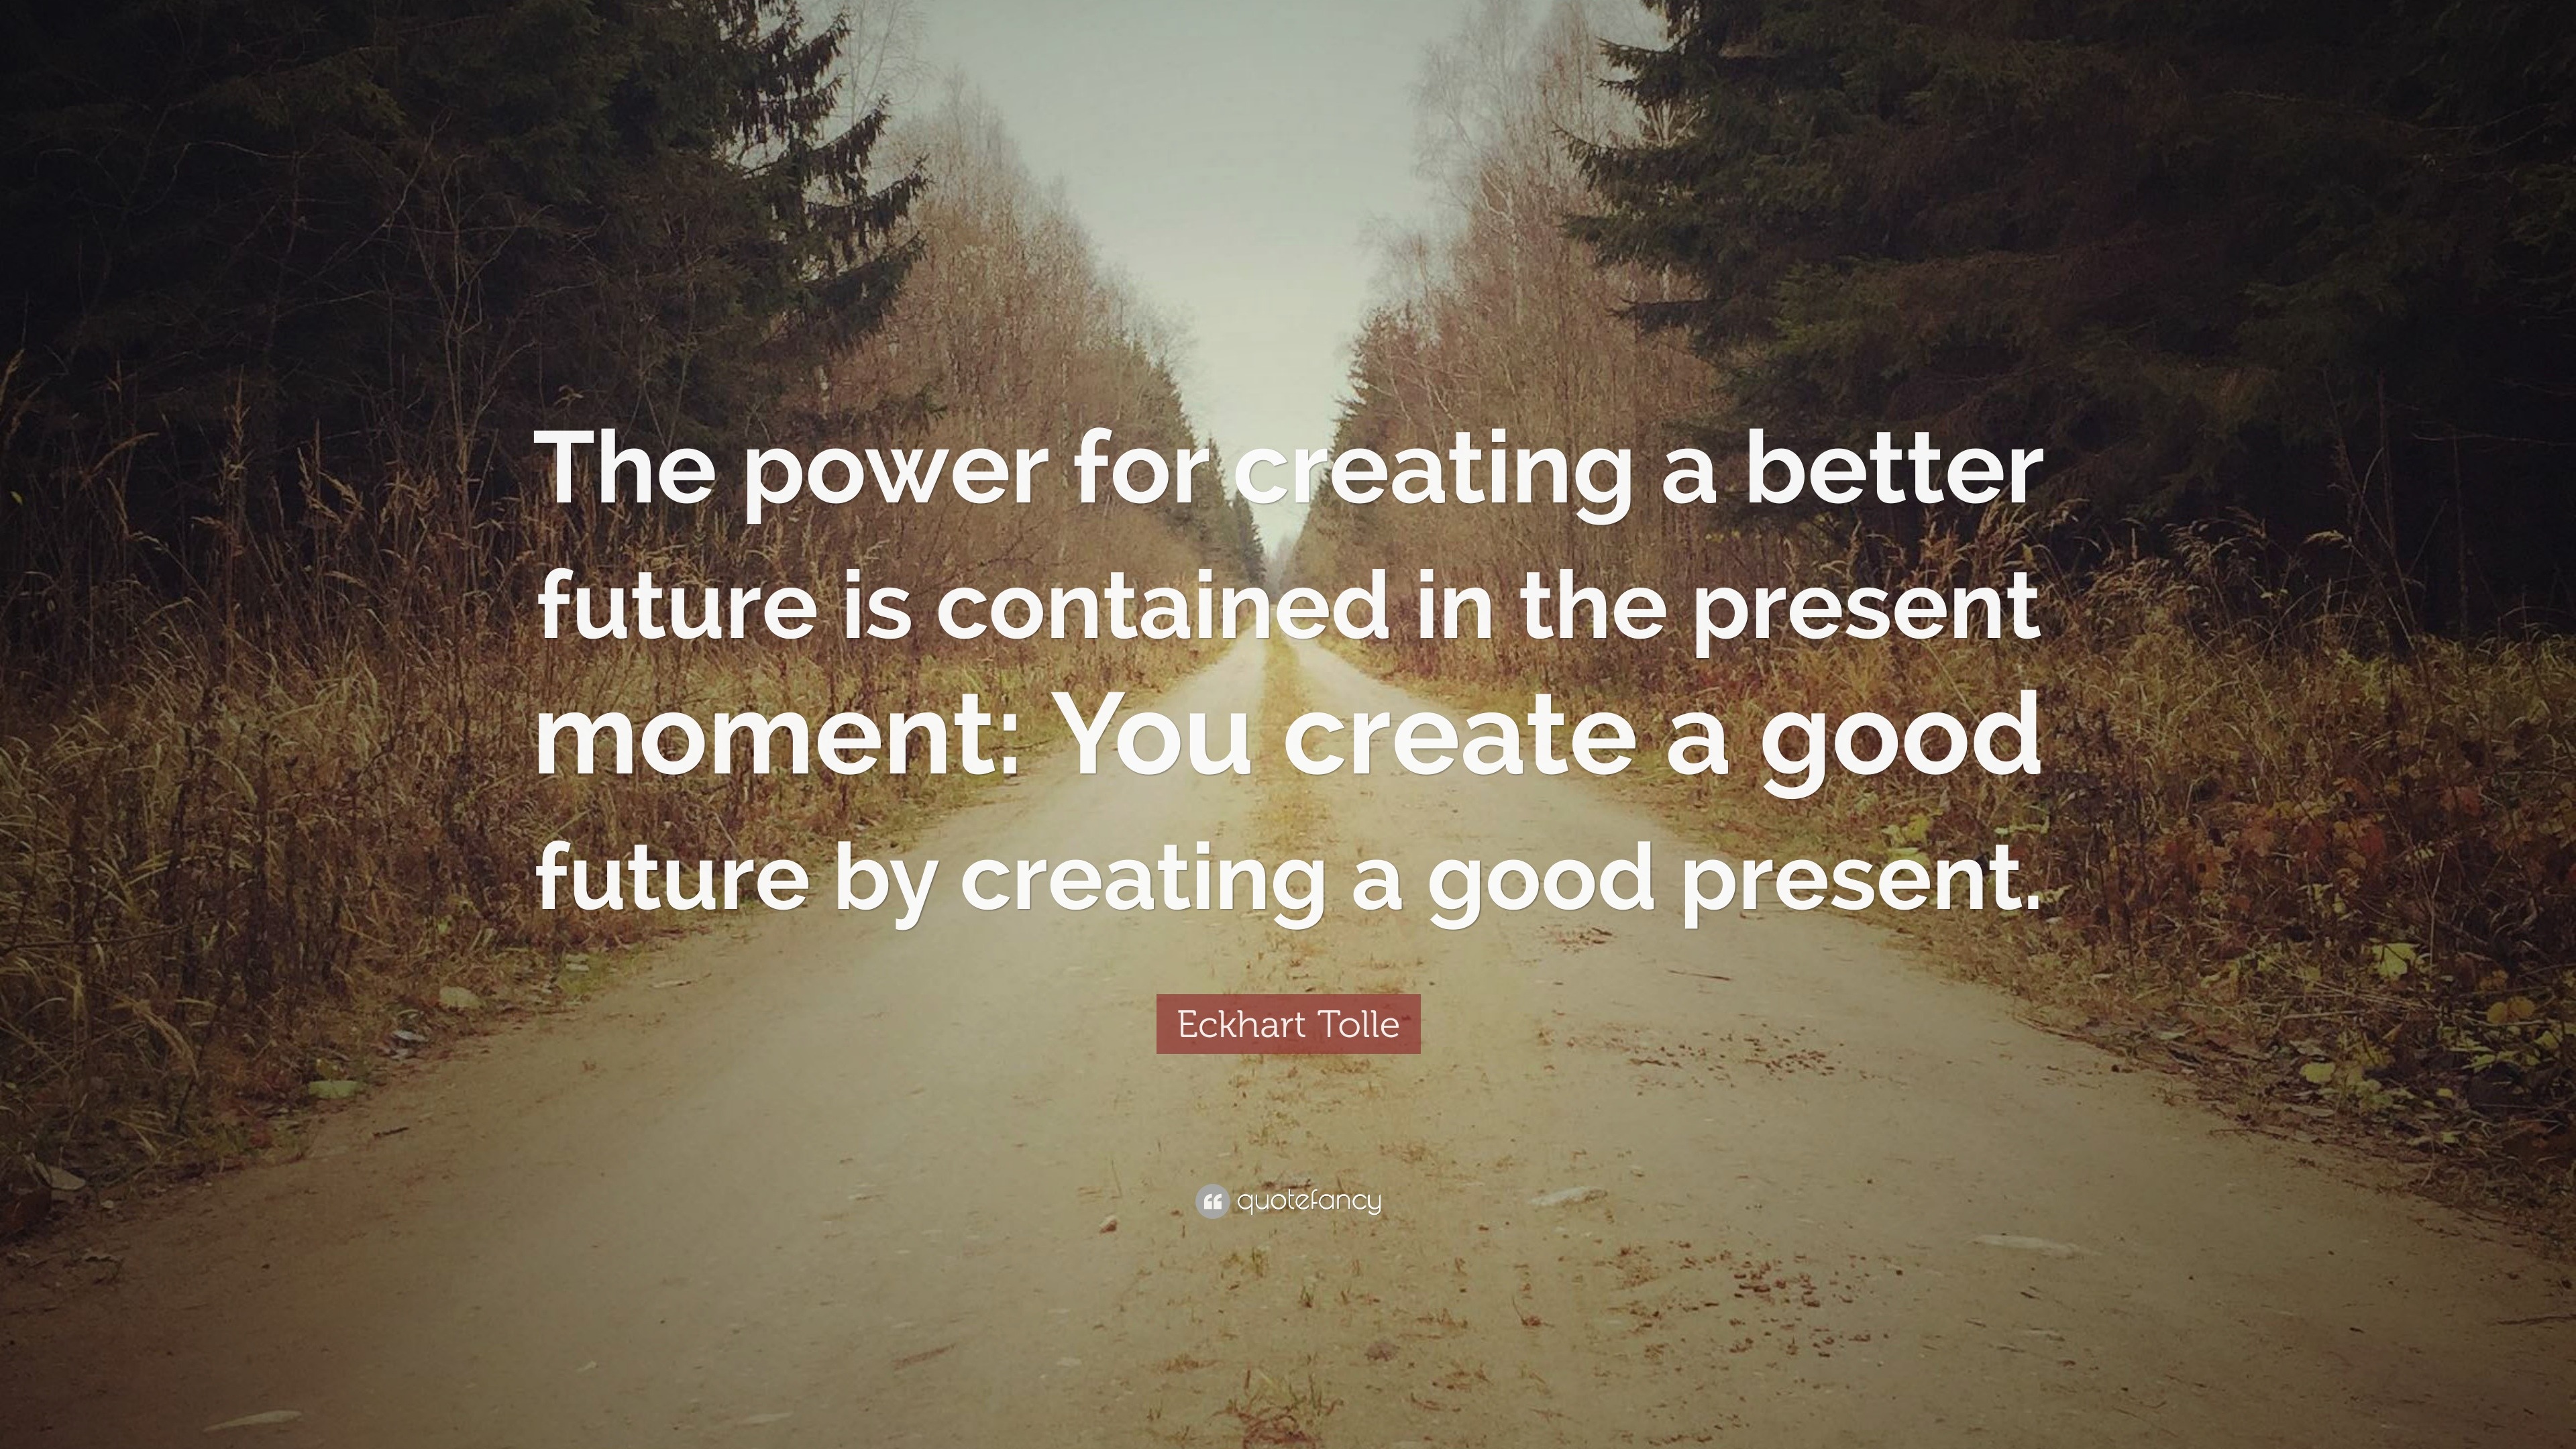 Eckhart Tolle Quote: “The power for creating a better future is